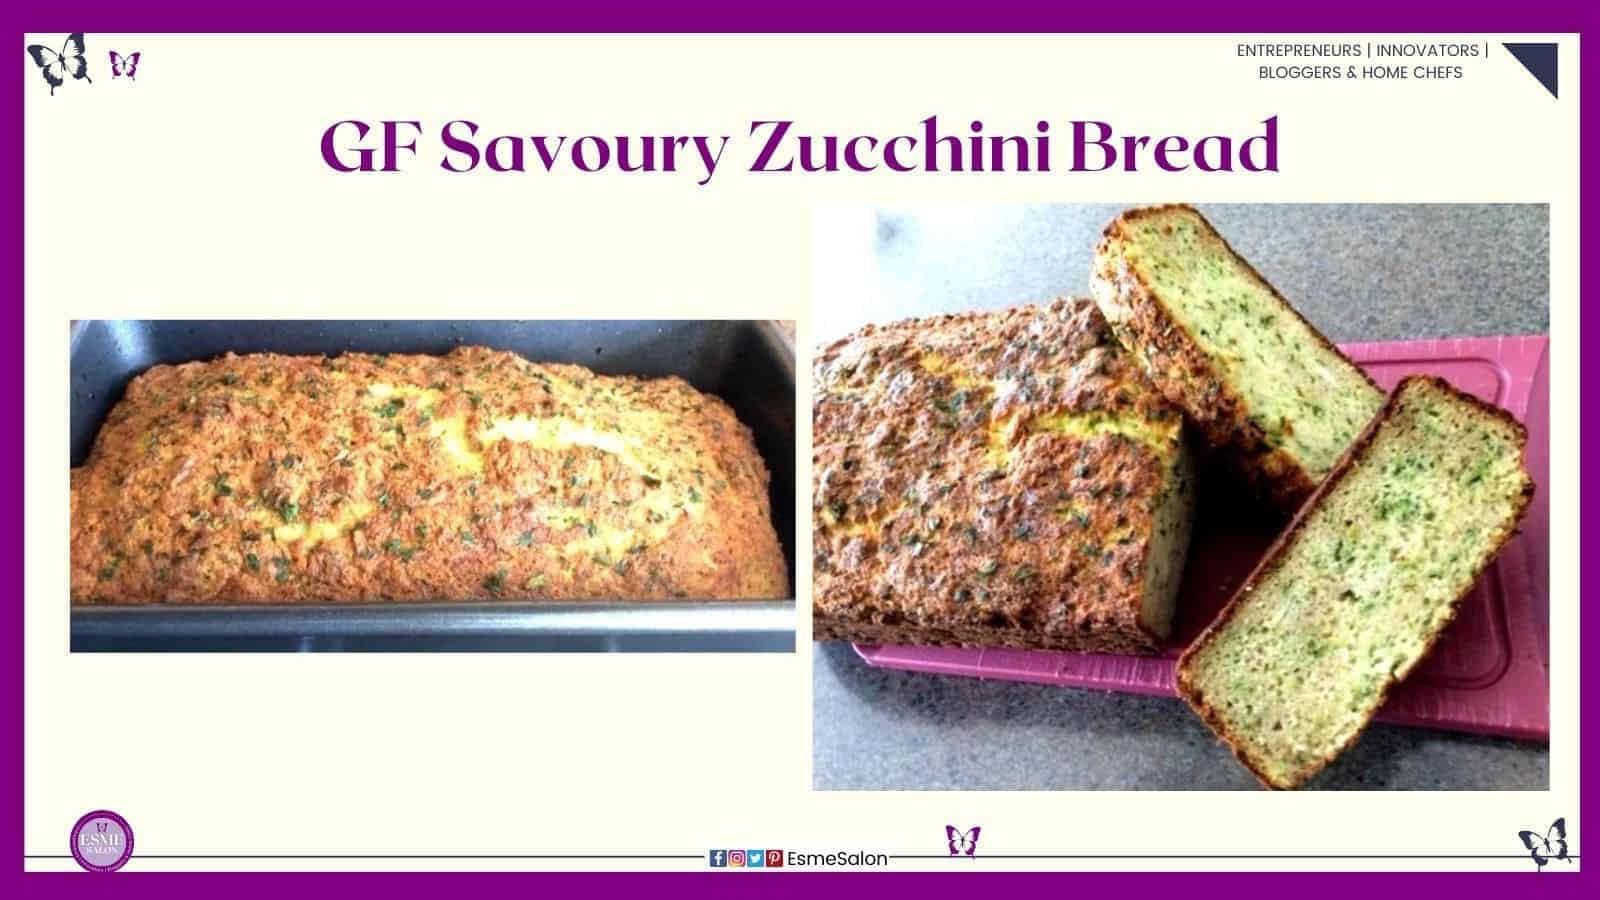 an image of a sliced GF Savoury Zucchini Bread on a red cutting board and in baking tin